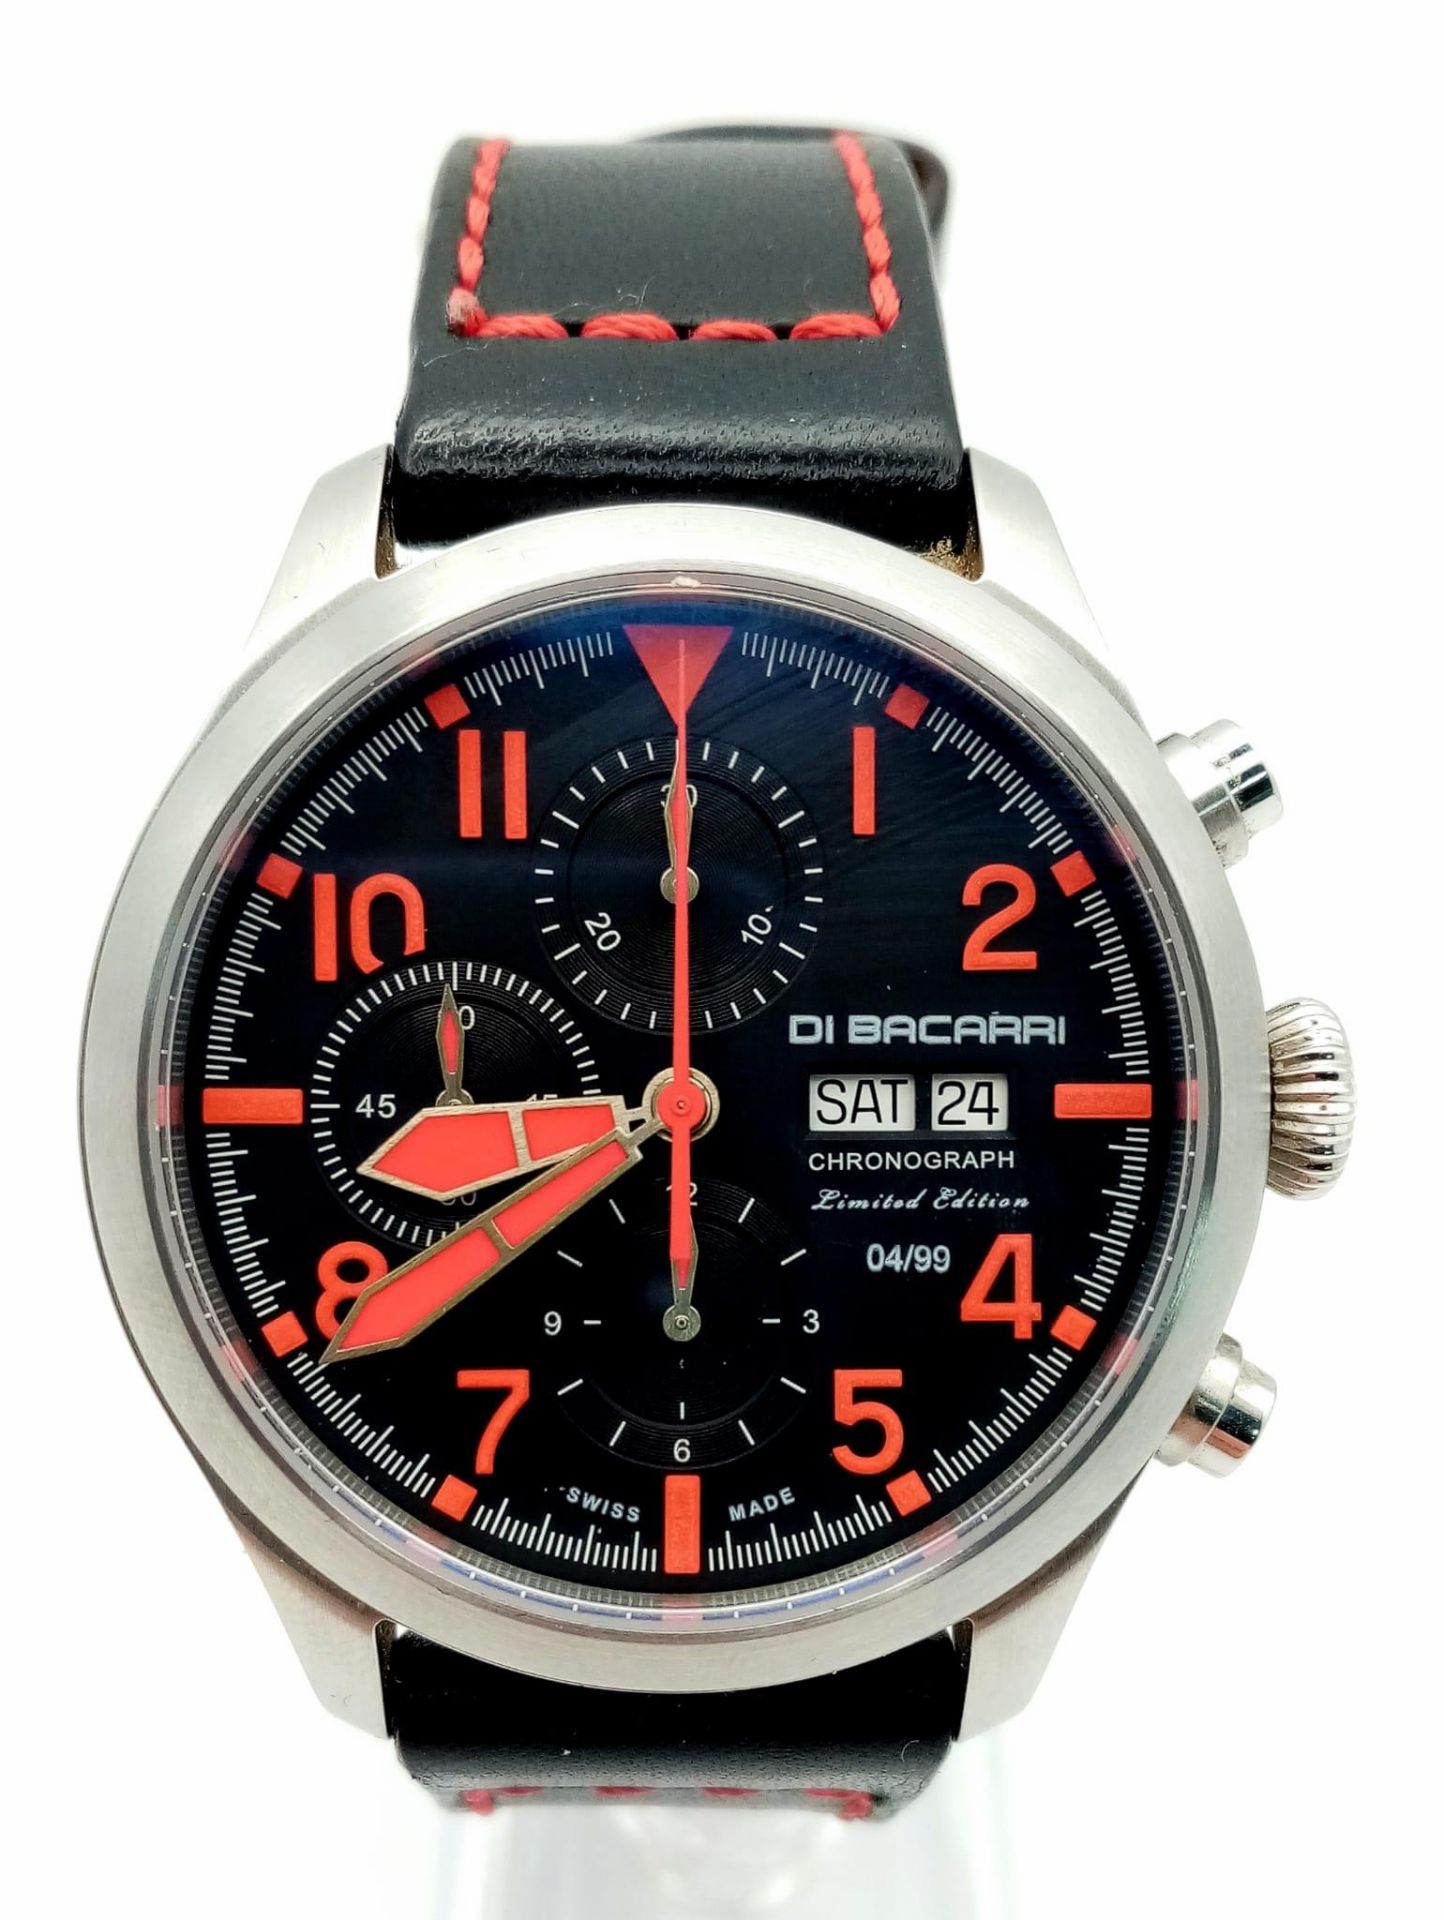 A Very Rare Limited Edition (4 of 99) Automatic Chronograph Watch from the Renato Collection by Di - Image 2 of 8